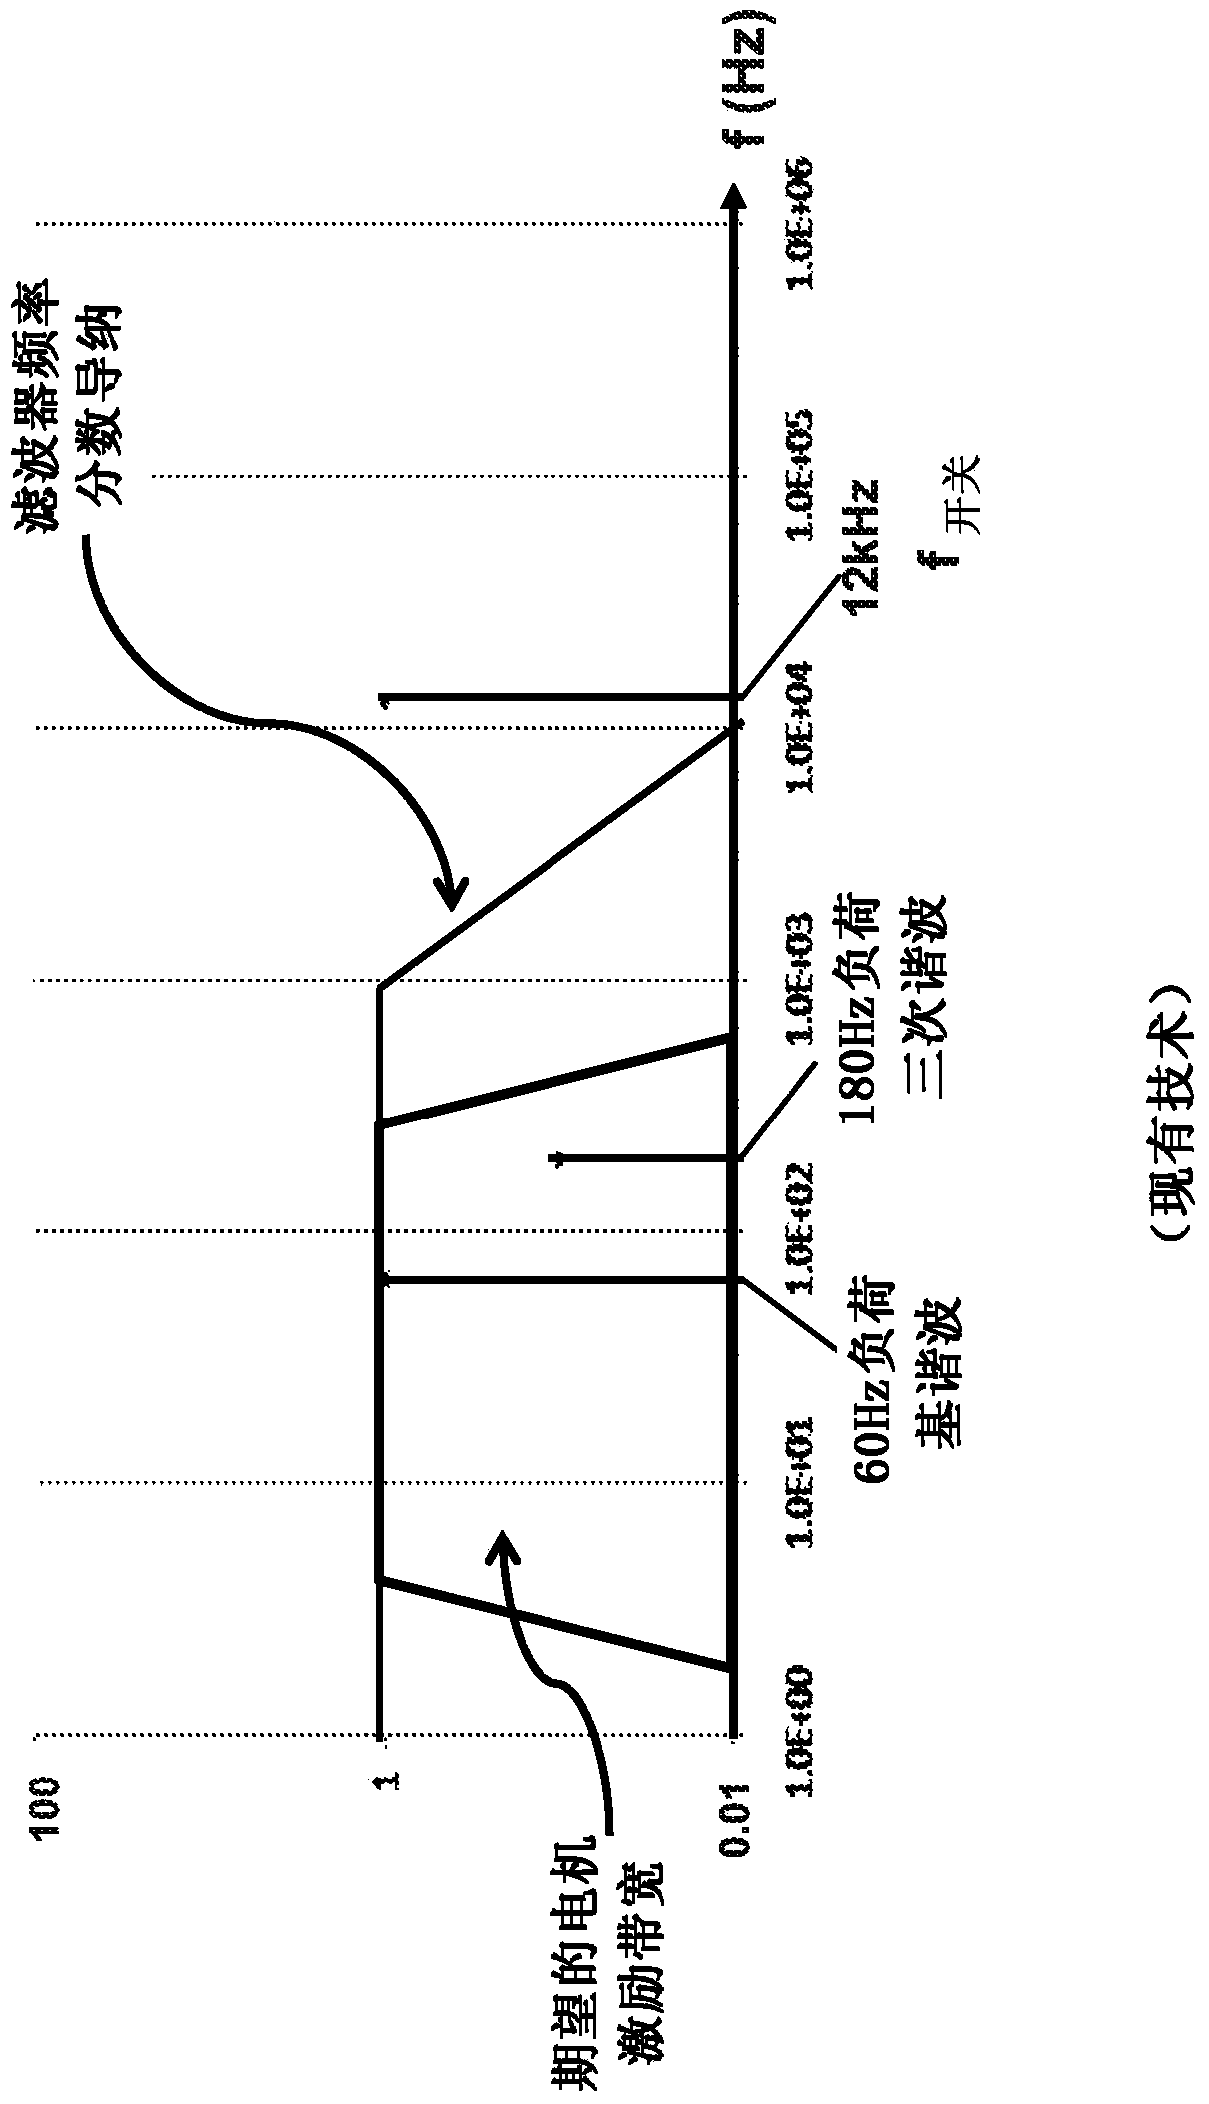 Electronic components with reactive filters